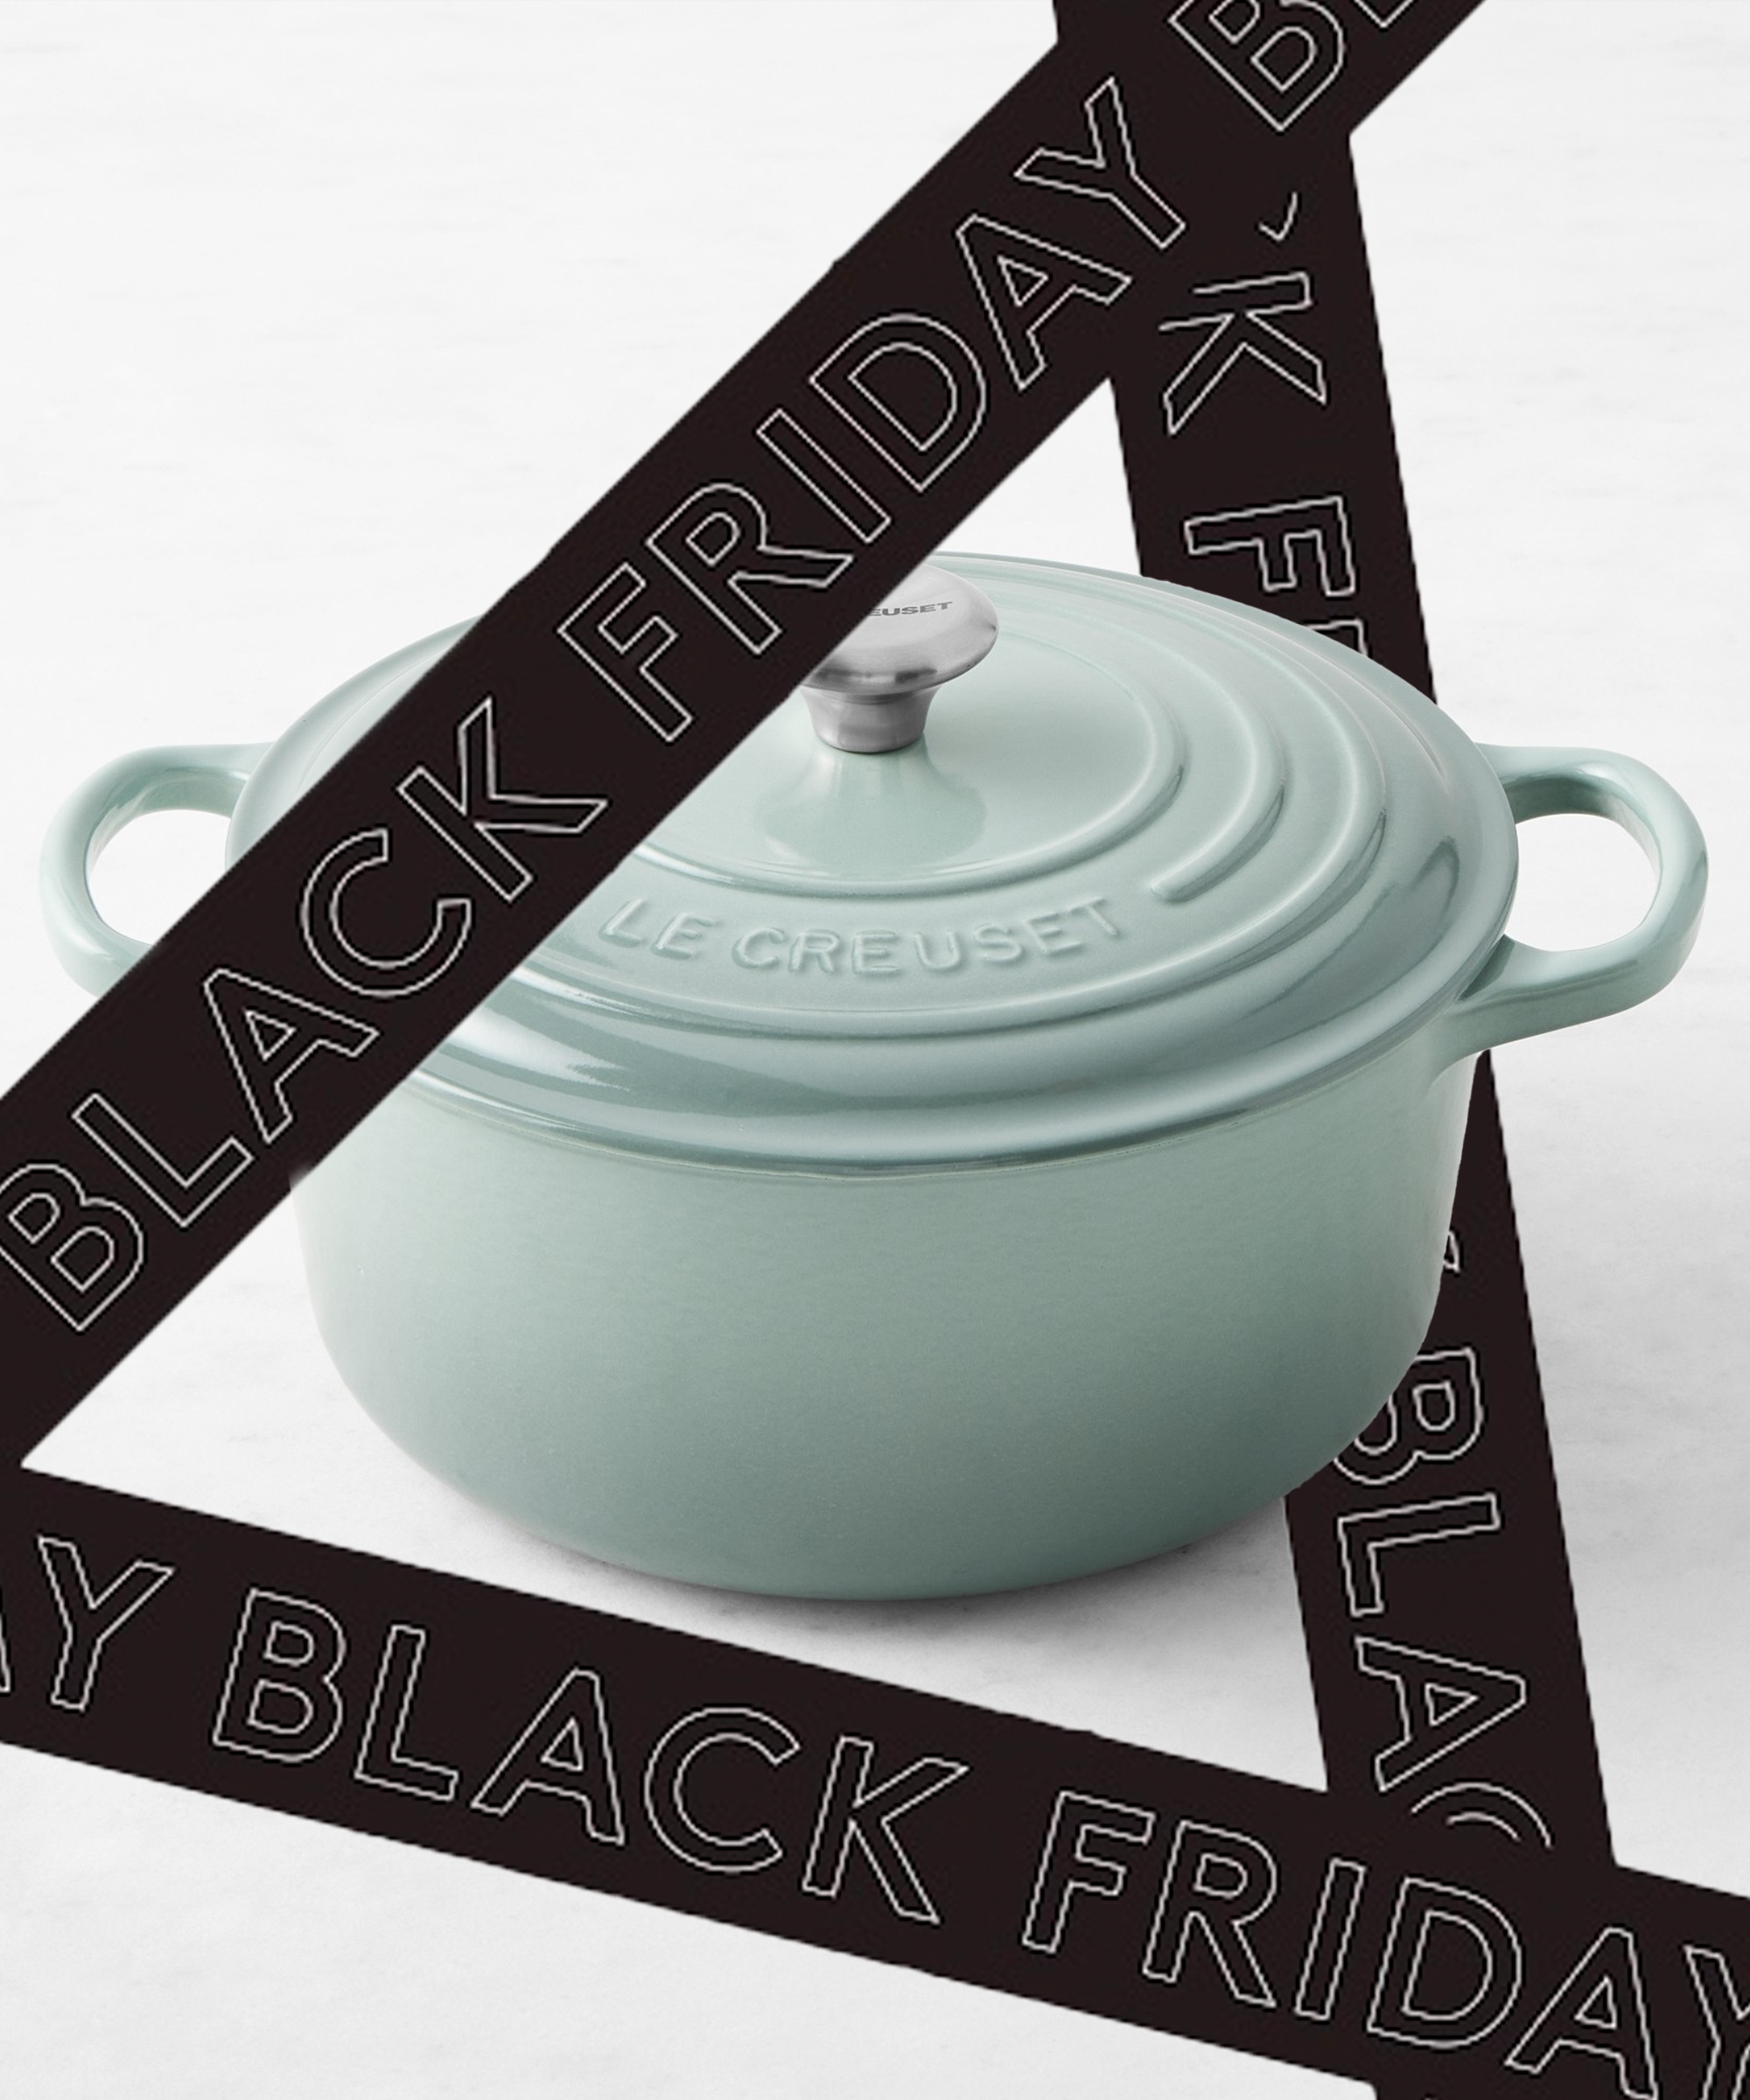 MY FAVORITE COOKWARE  best pots and pans worth the money (on black friday  and cyber monday) 